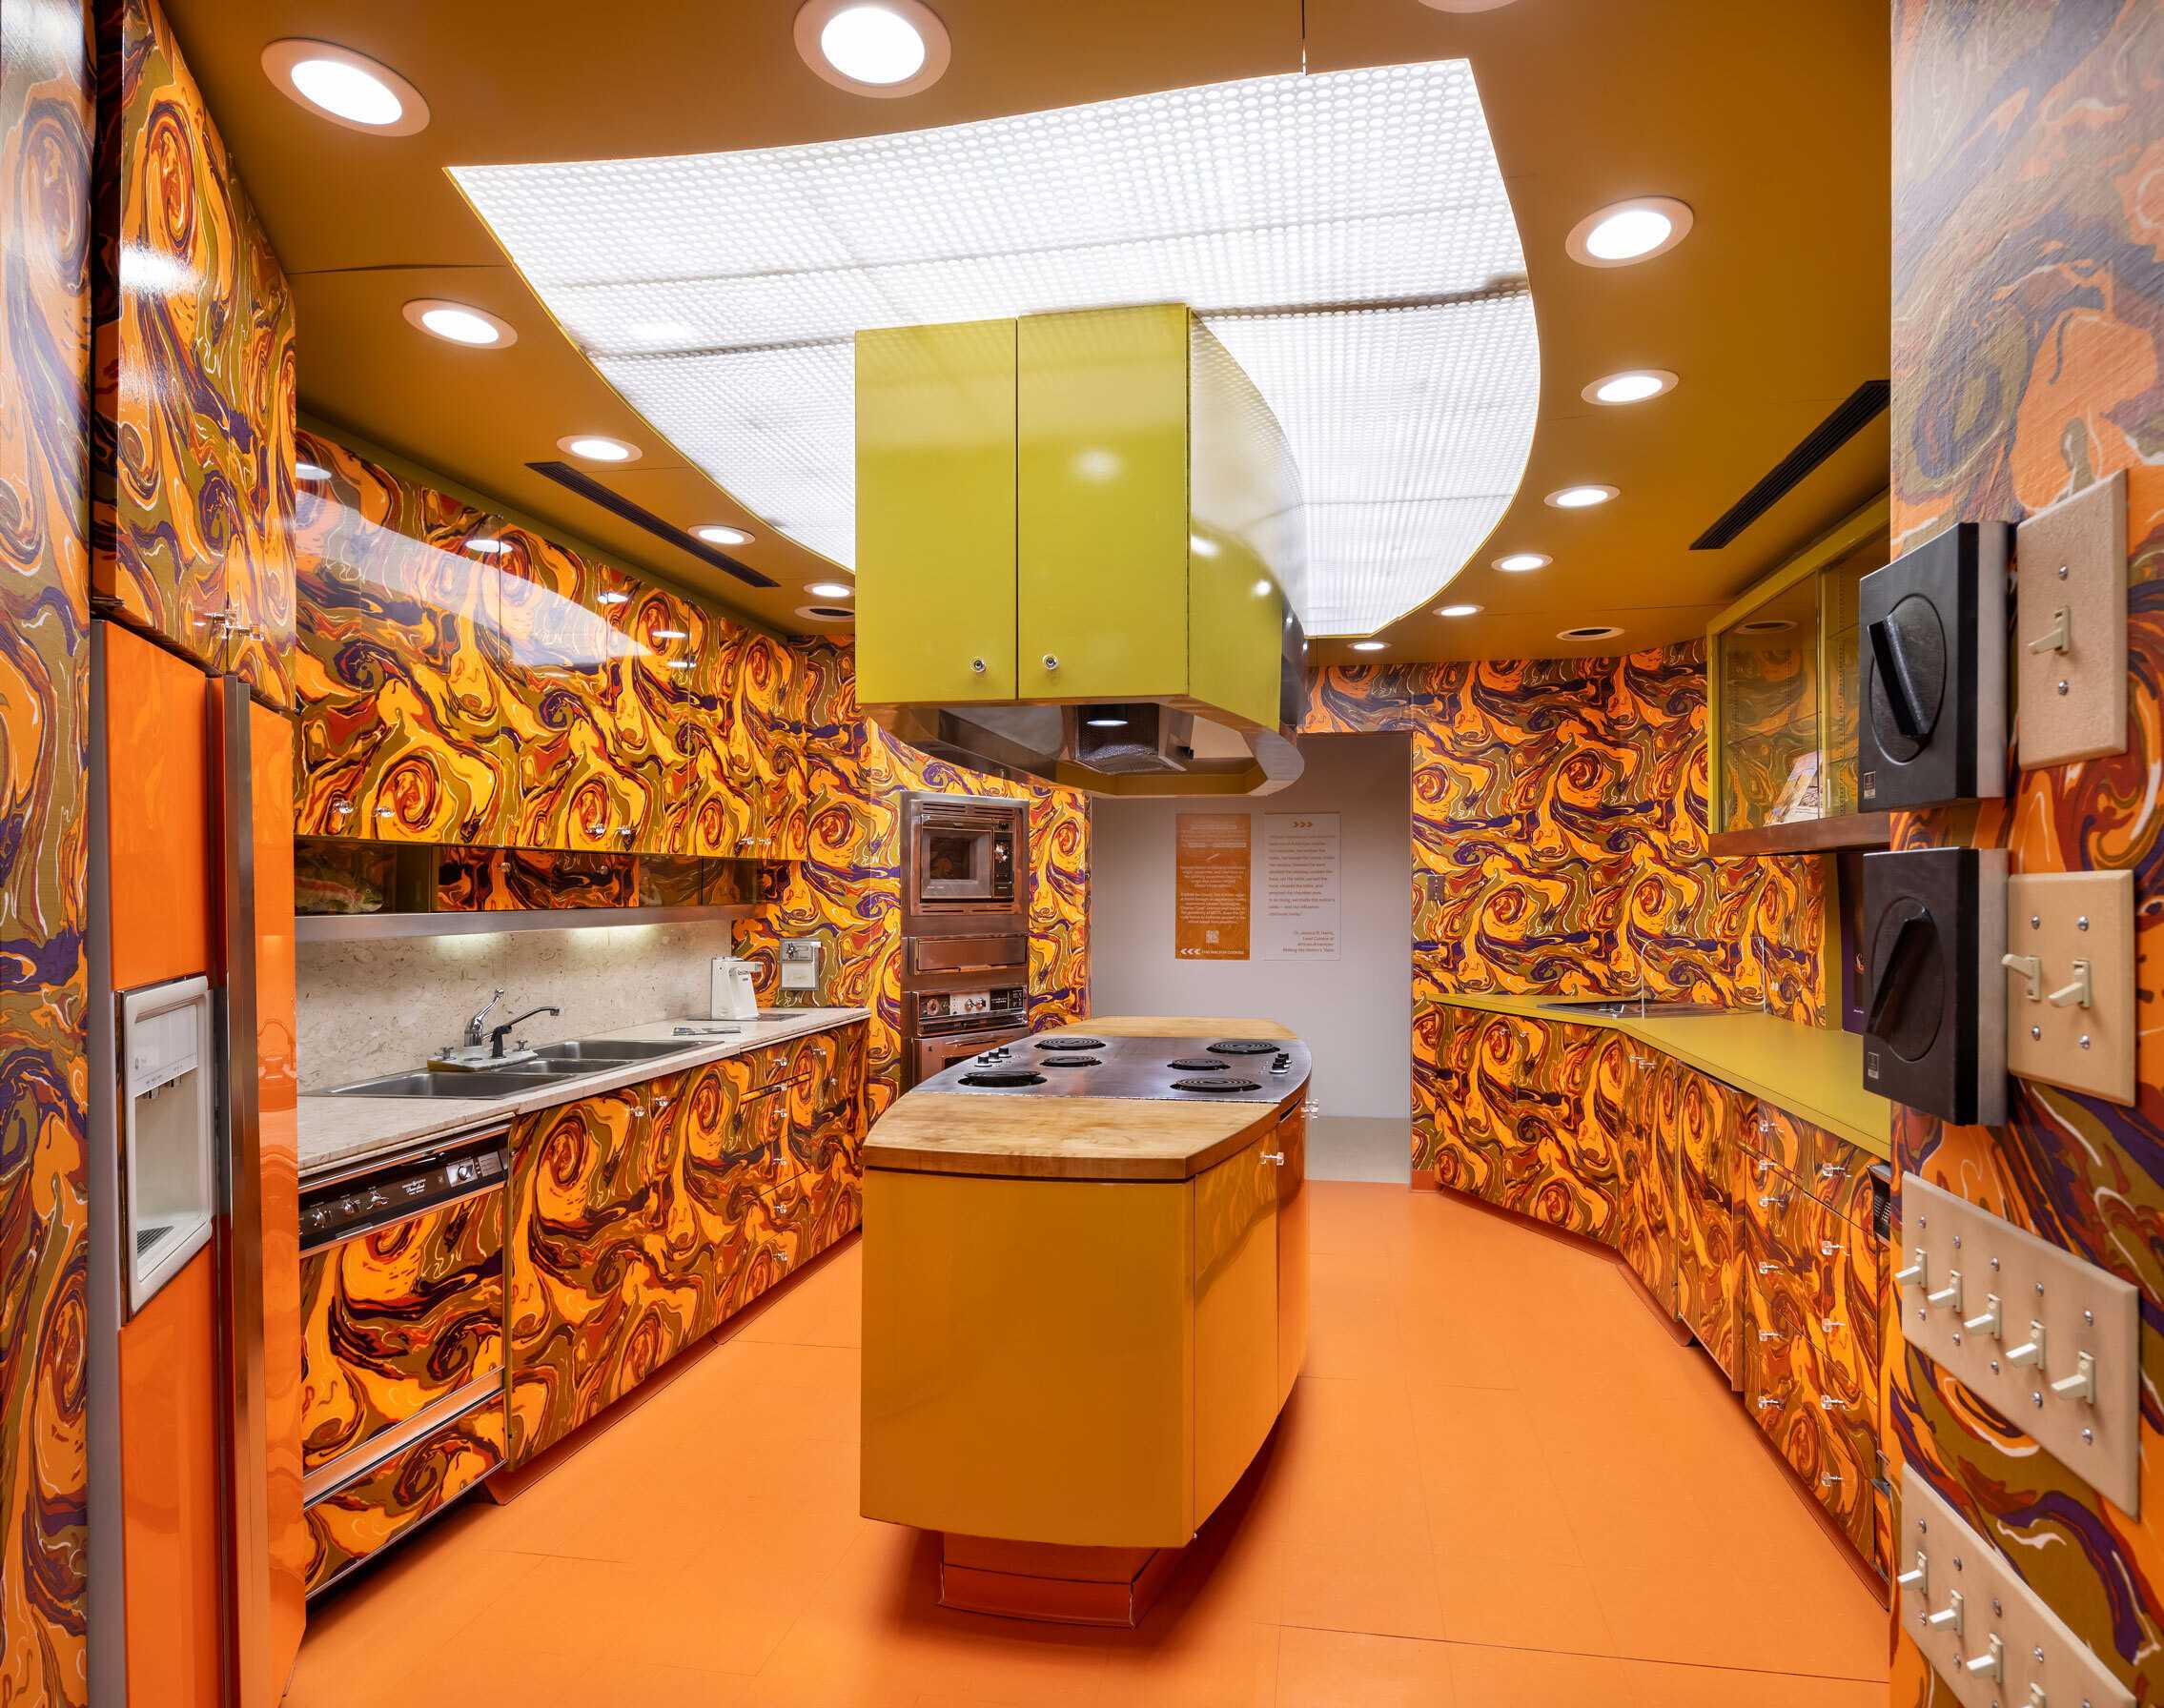 A 70s decor kitchen with a bright orange, purple, and lime green swirl pattern on the cabinets and walls.